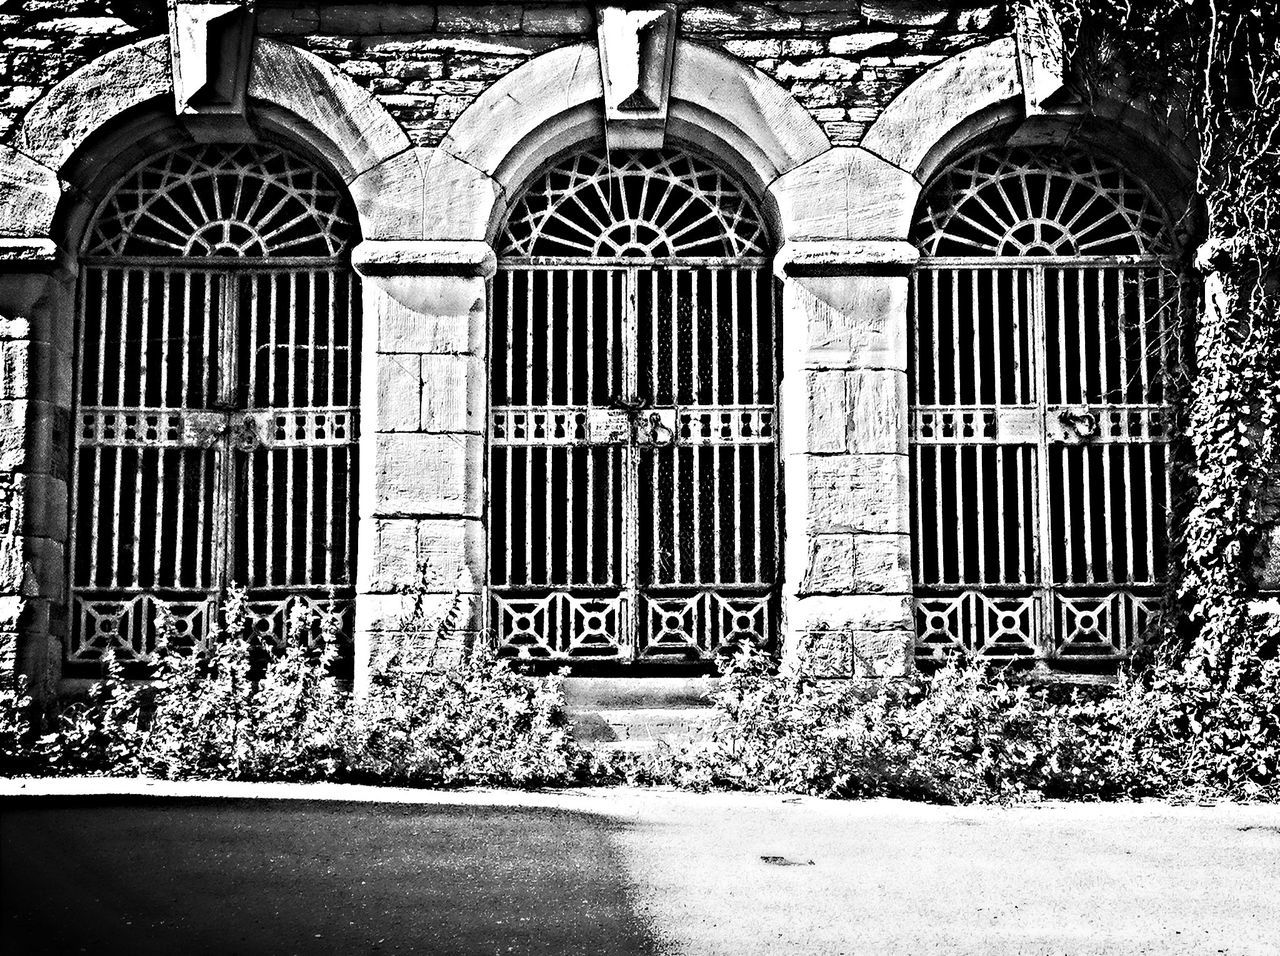 architecture, built structure, window, building exterior, closed, door, entrance, arch, house, gate, facade, safety, day, no people, protection, outdoors, security, plant, wall, repetition